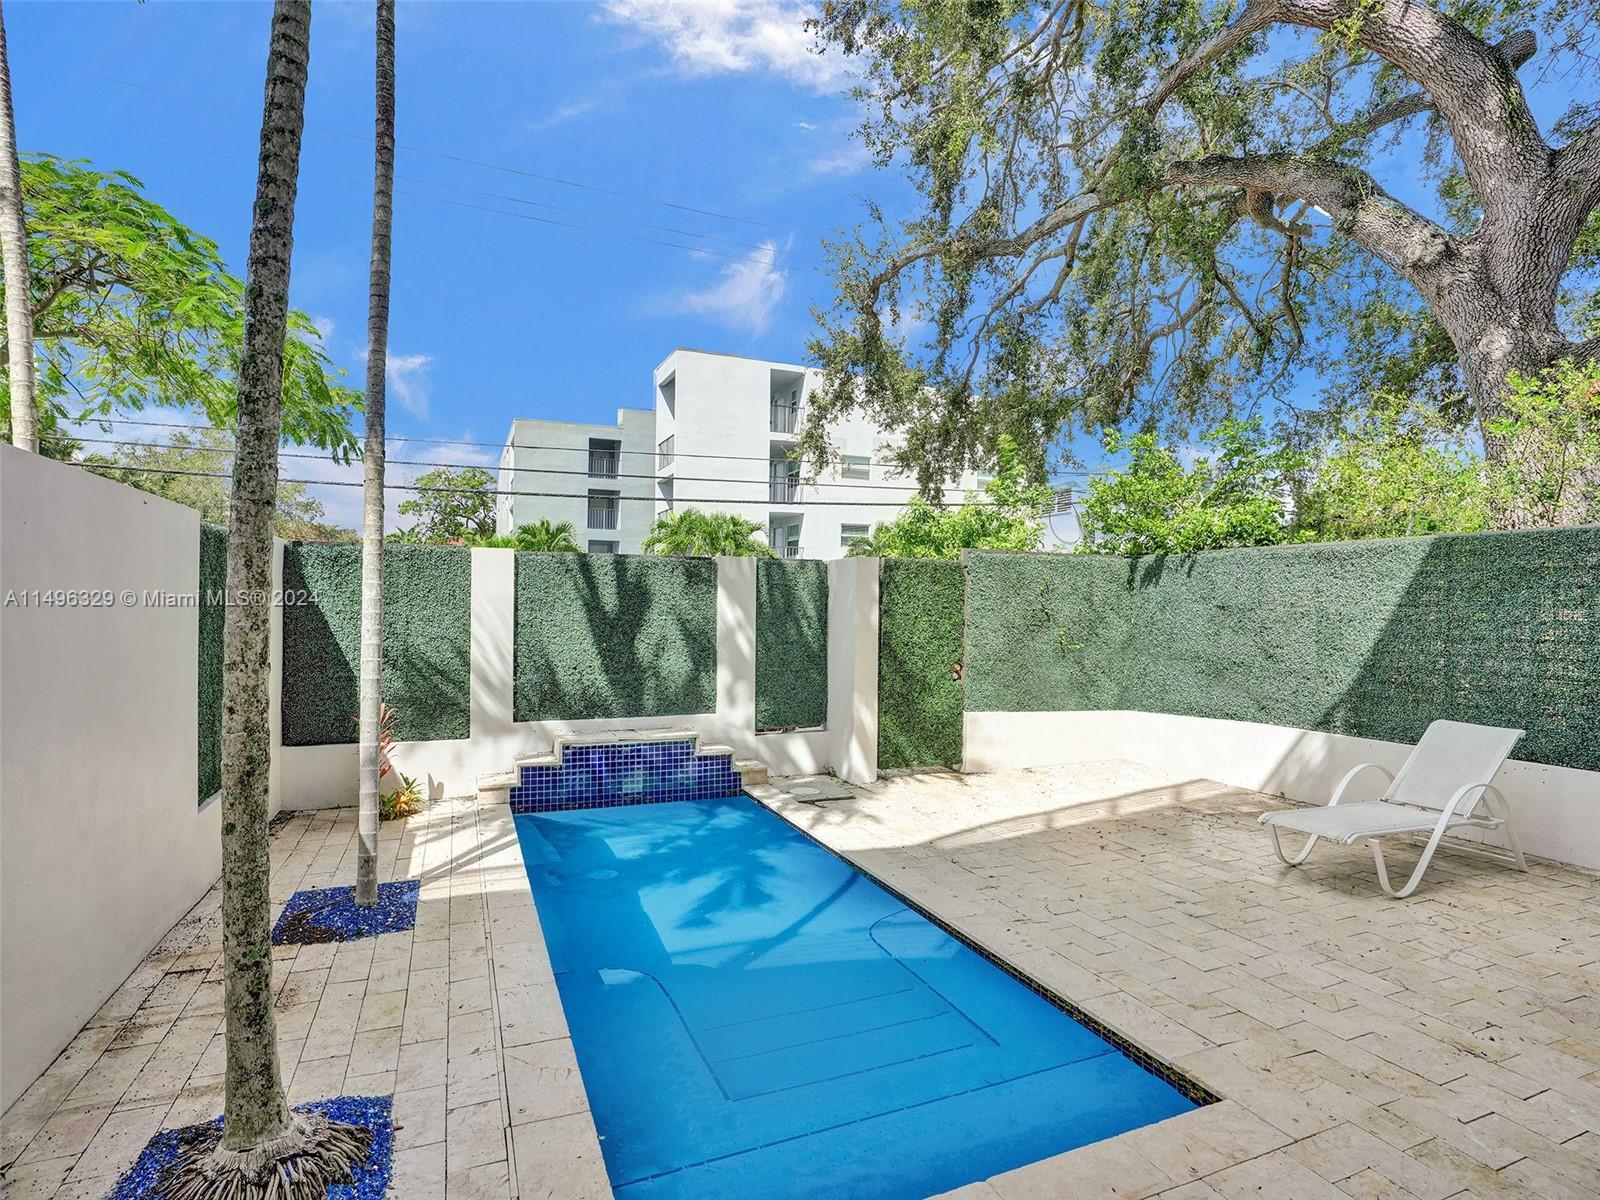 Photo of 610 NE 14th Ave #6 in Fort Lauderdale, FL